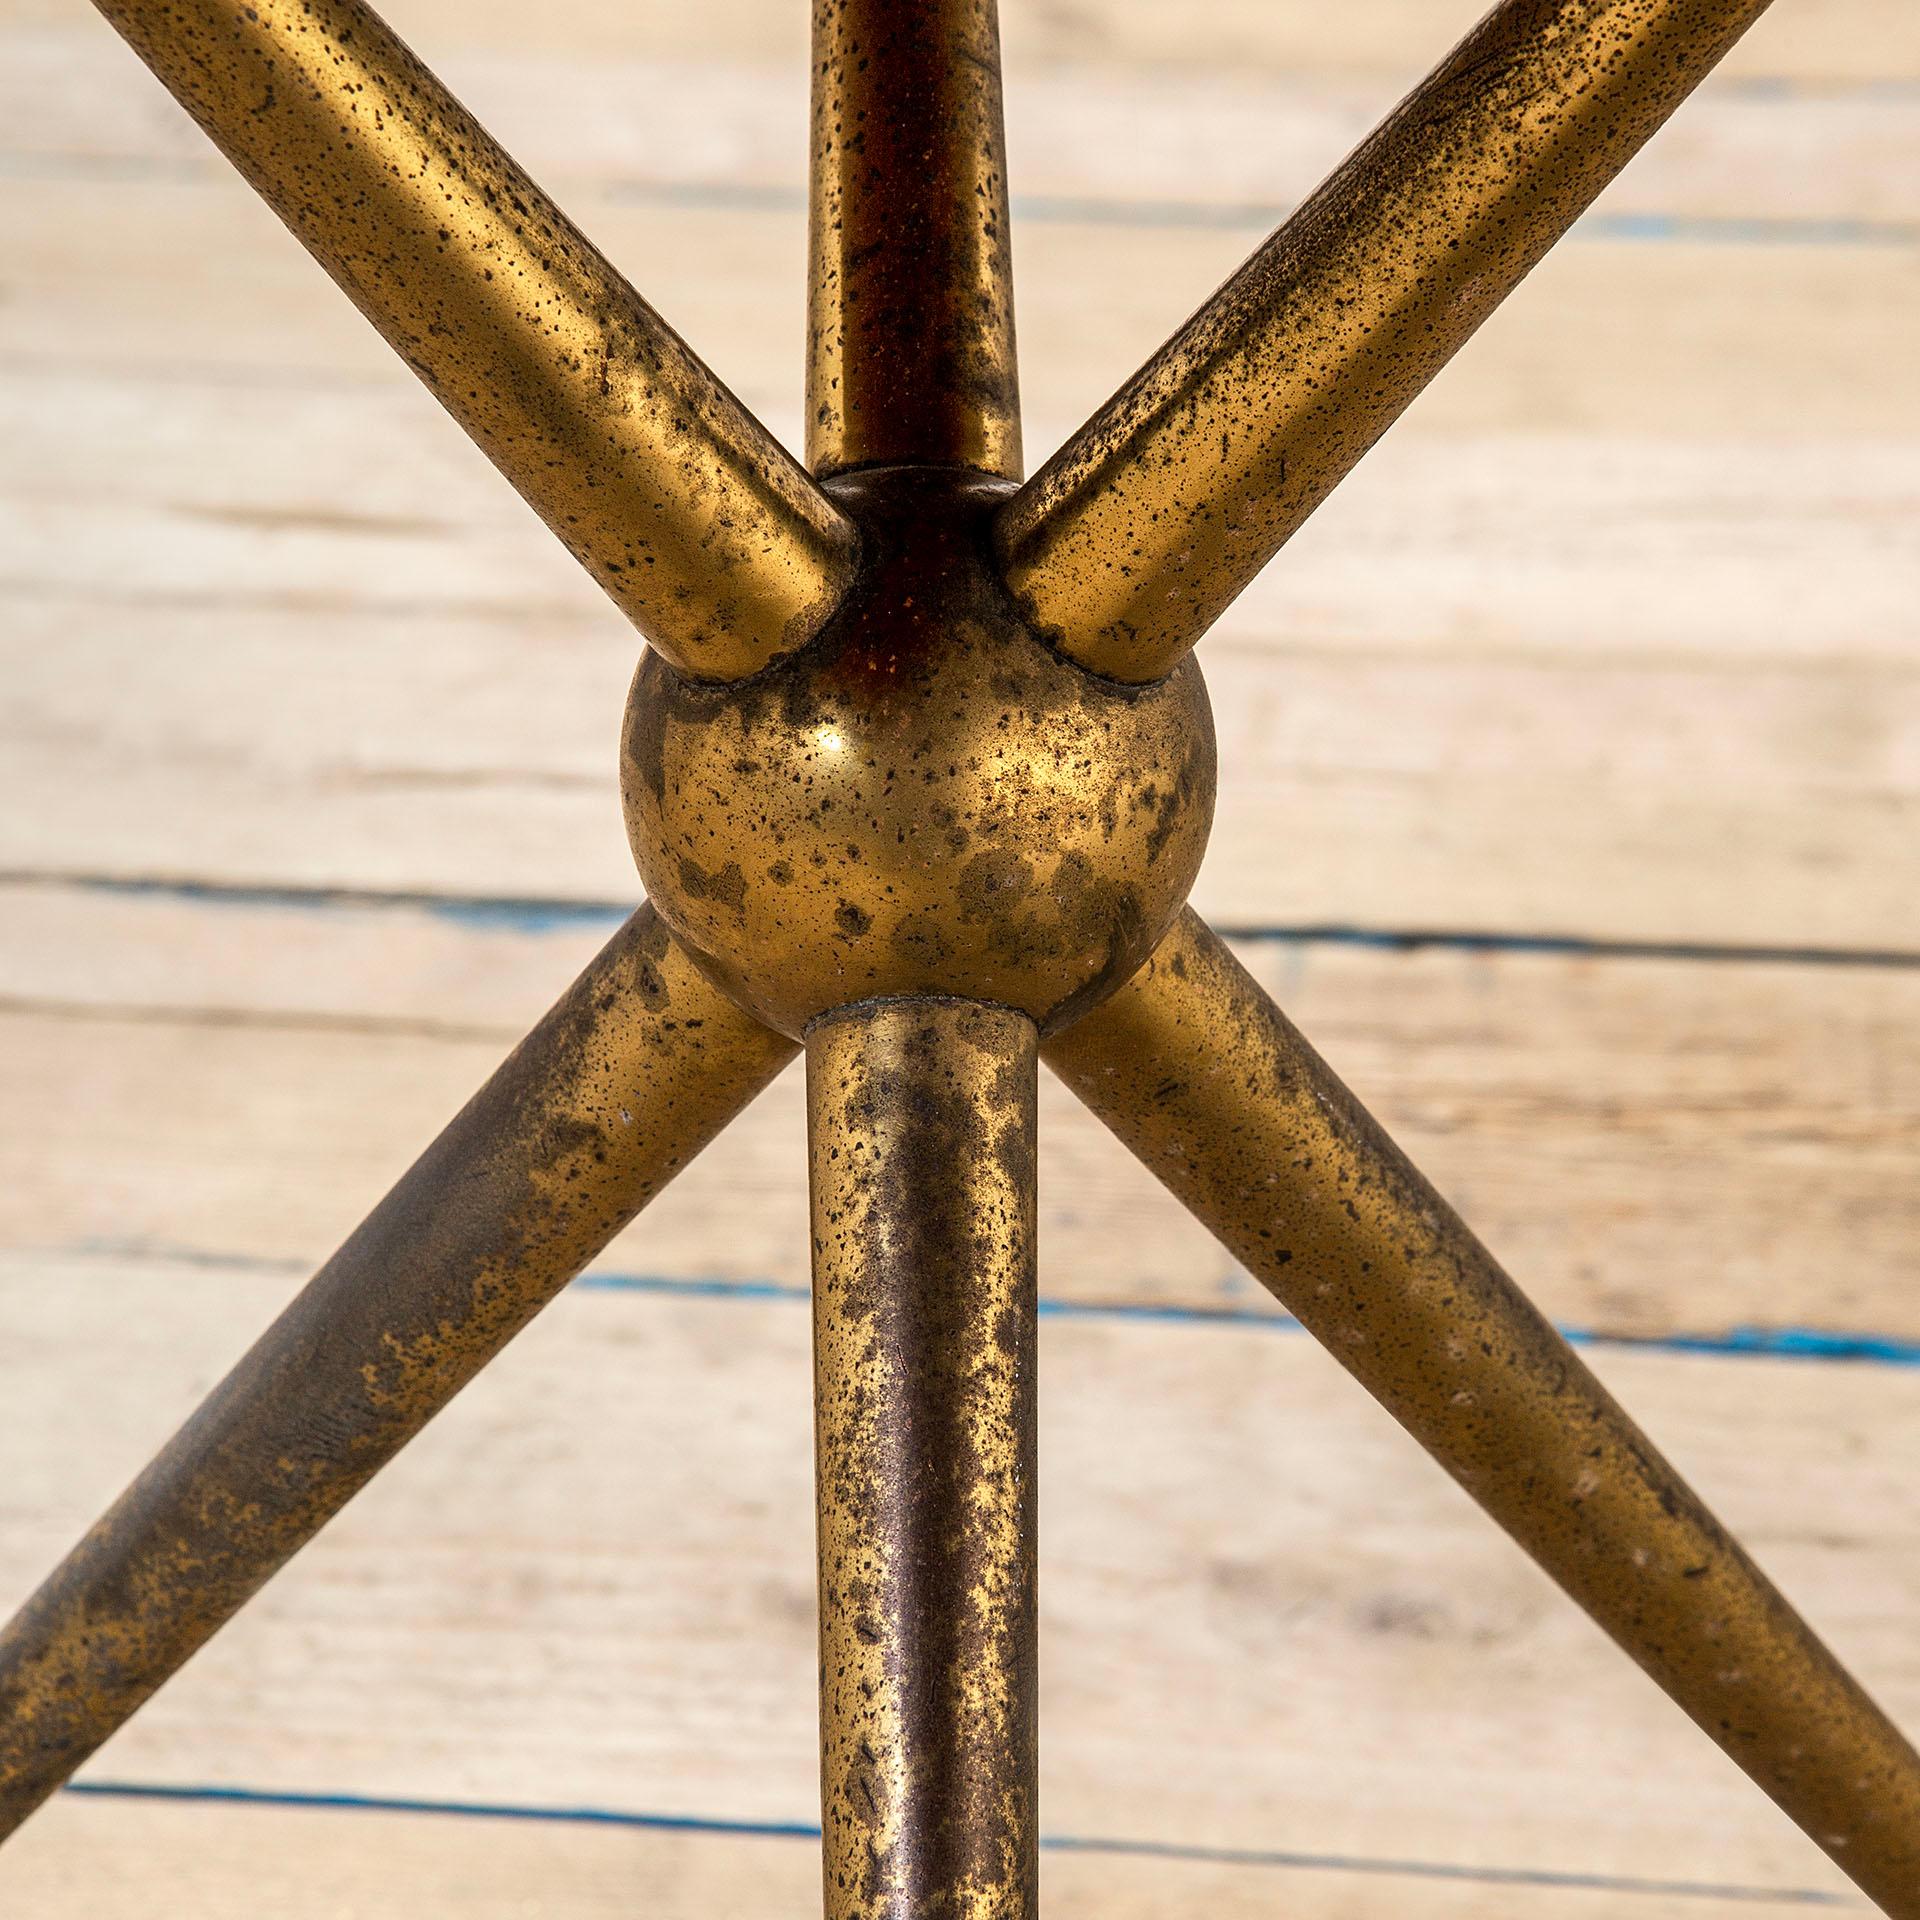 Mid-20th Century 20th Century Osvaldo Borsani Tripod Side Table Brass, Wood and Glass for Abv 50s For Sale